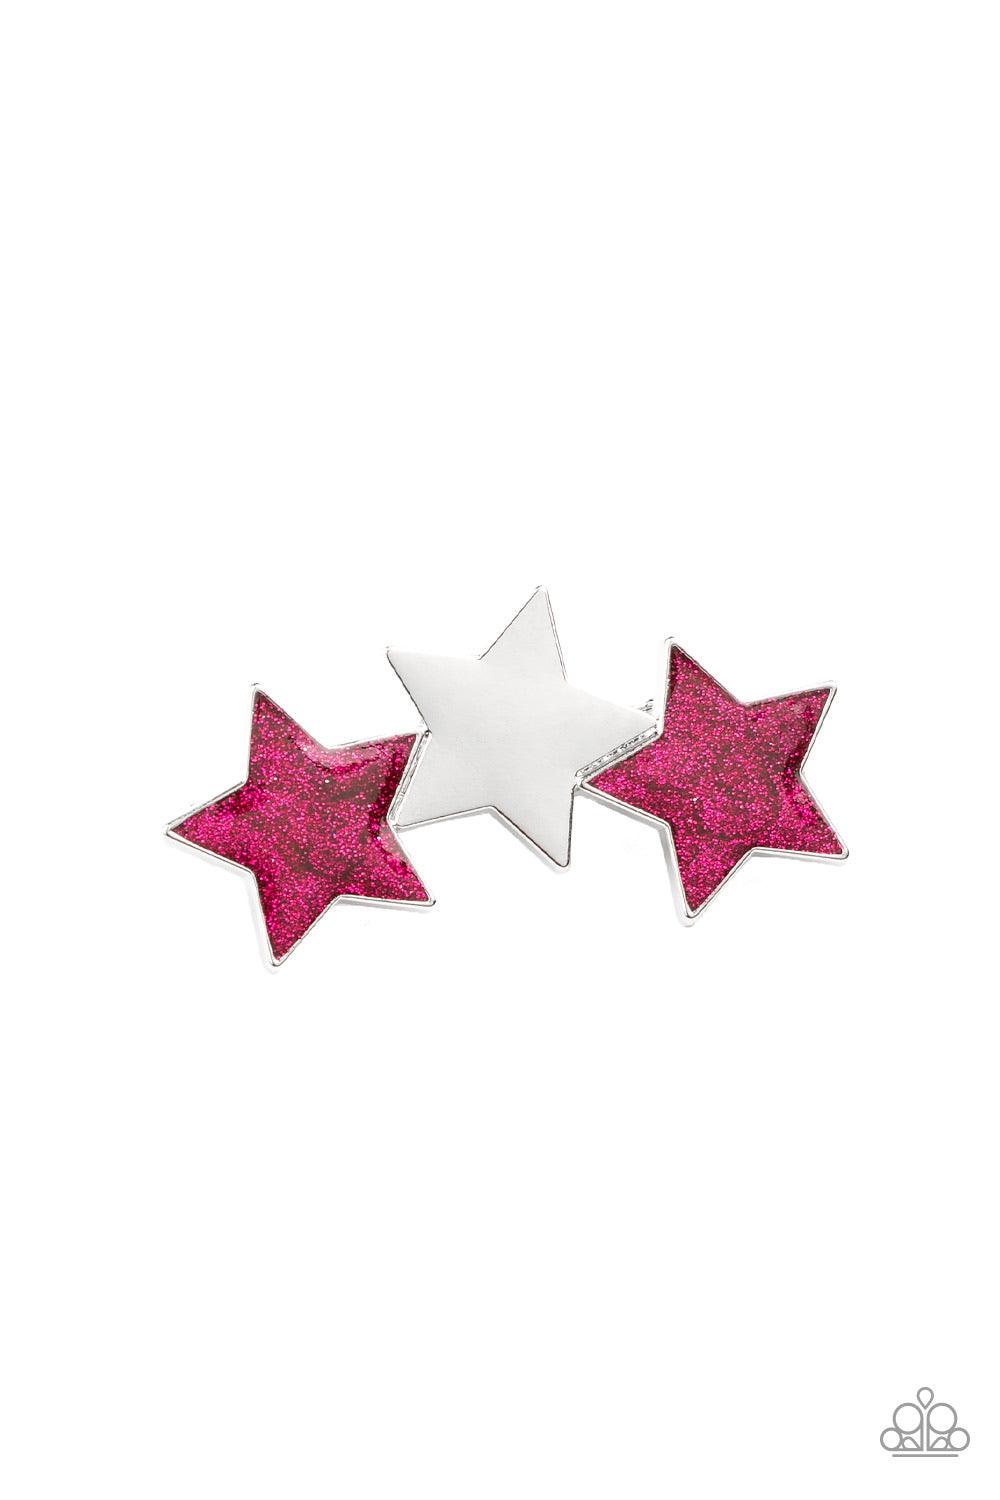 Paparazzi Accessories Don’t Get Me STAR-Ted! - Pink Painted in glittery pink sparkles, a sparkly pair of stars flanks a shiny silver star, coalescing into a stellar centerpiece. Features a standard hair clip. Sold as one individual hair clip. Hair Accesso